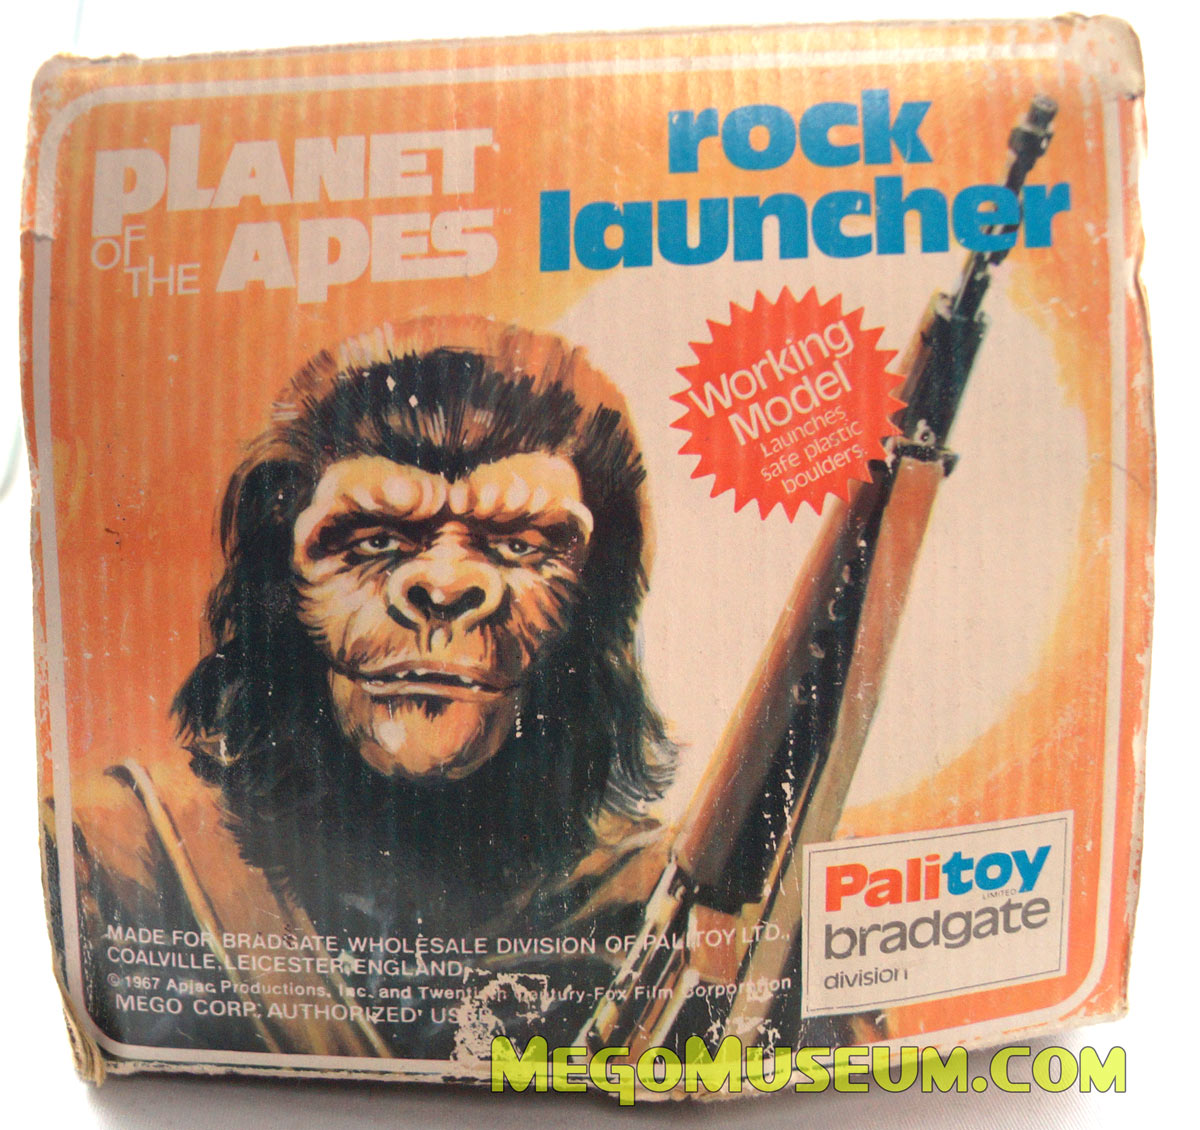 1976 ADVERT Toy Planet Of The Apes Play Set One Million BC Fort Apache